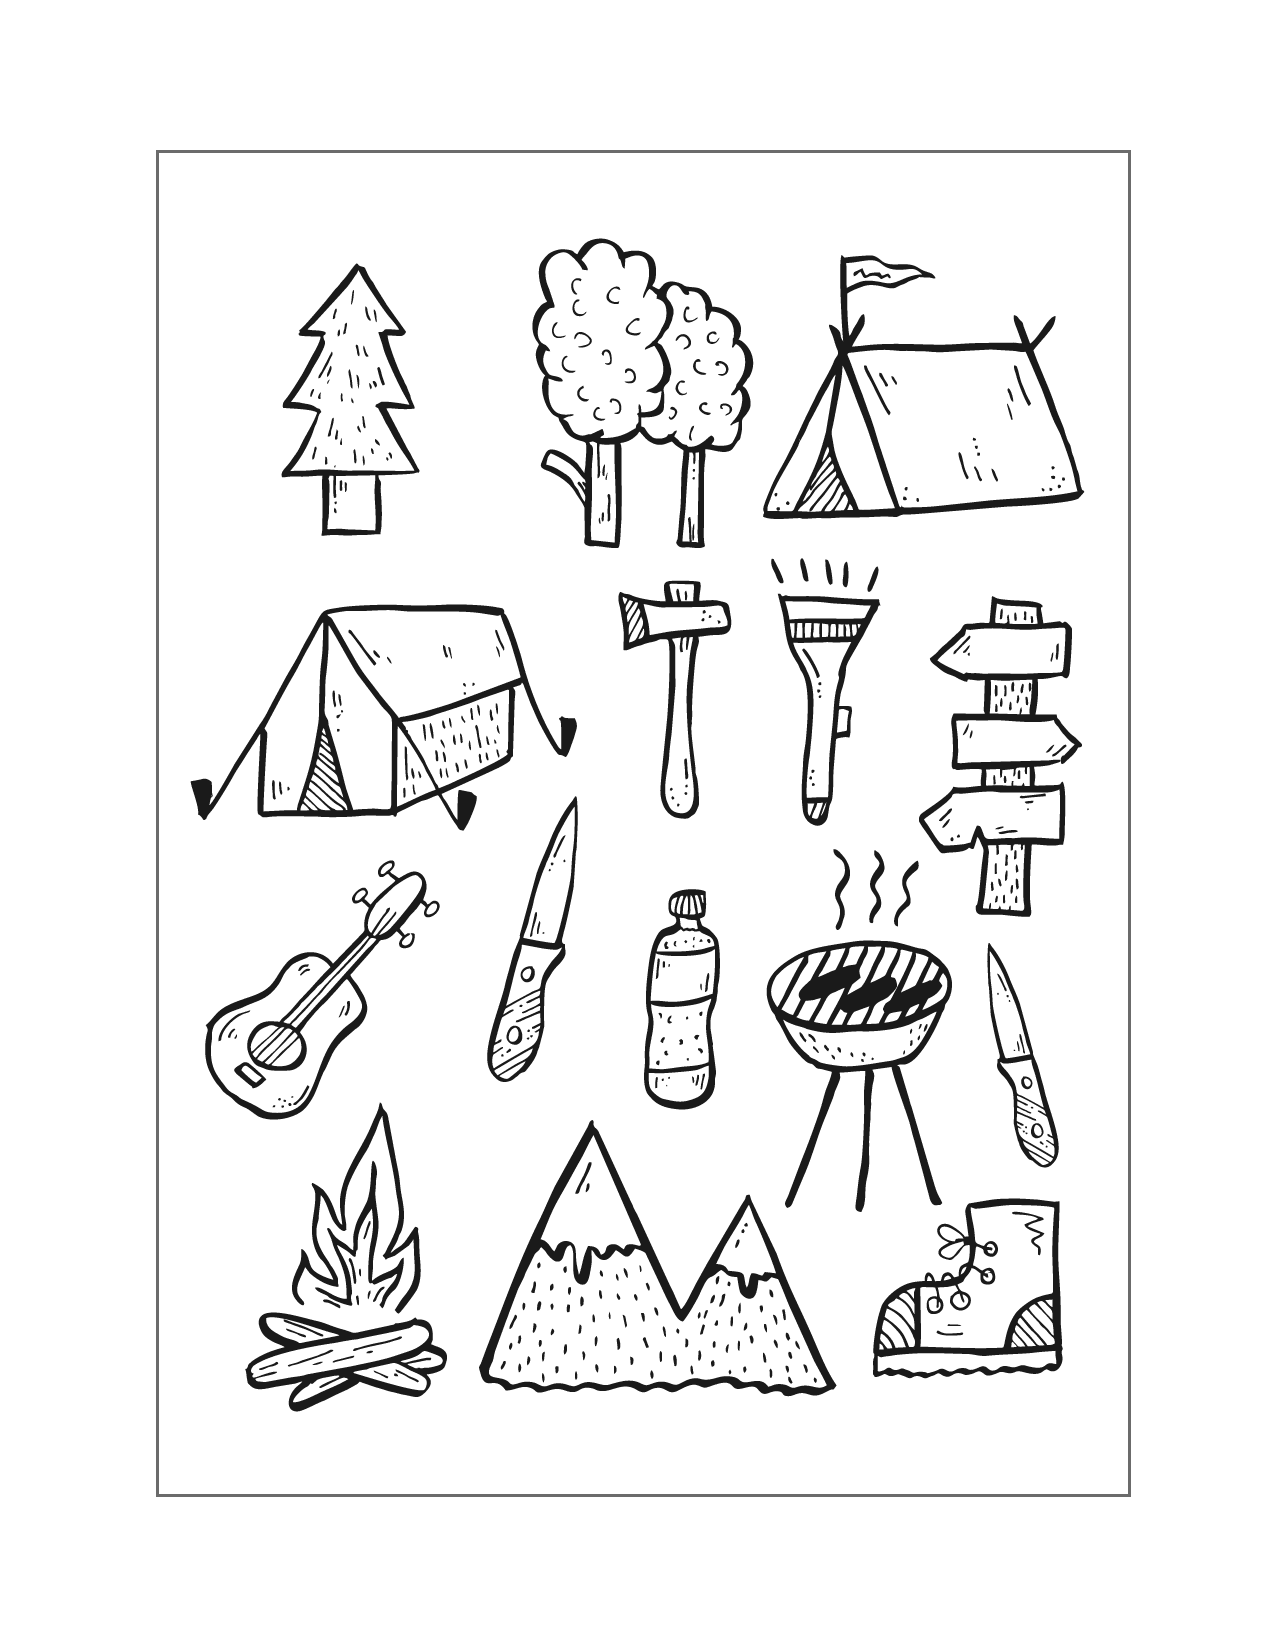 Fun Camping Icons Coloring Page